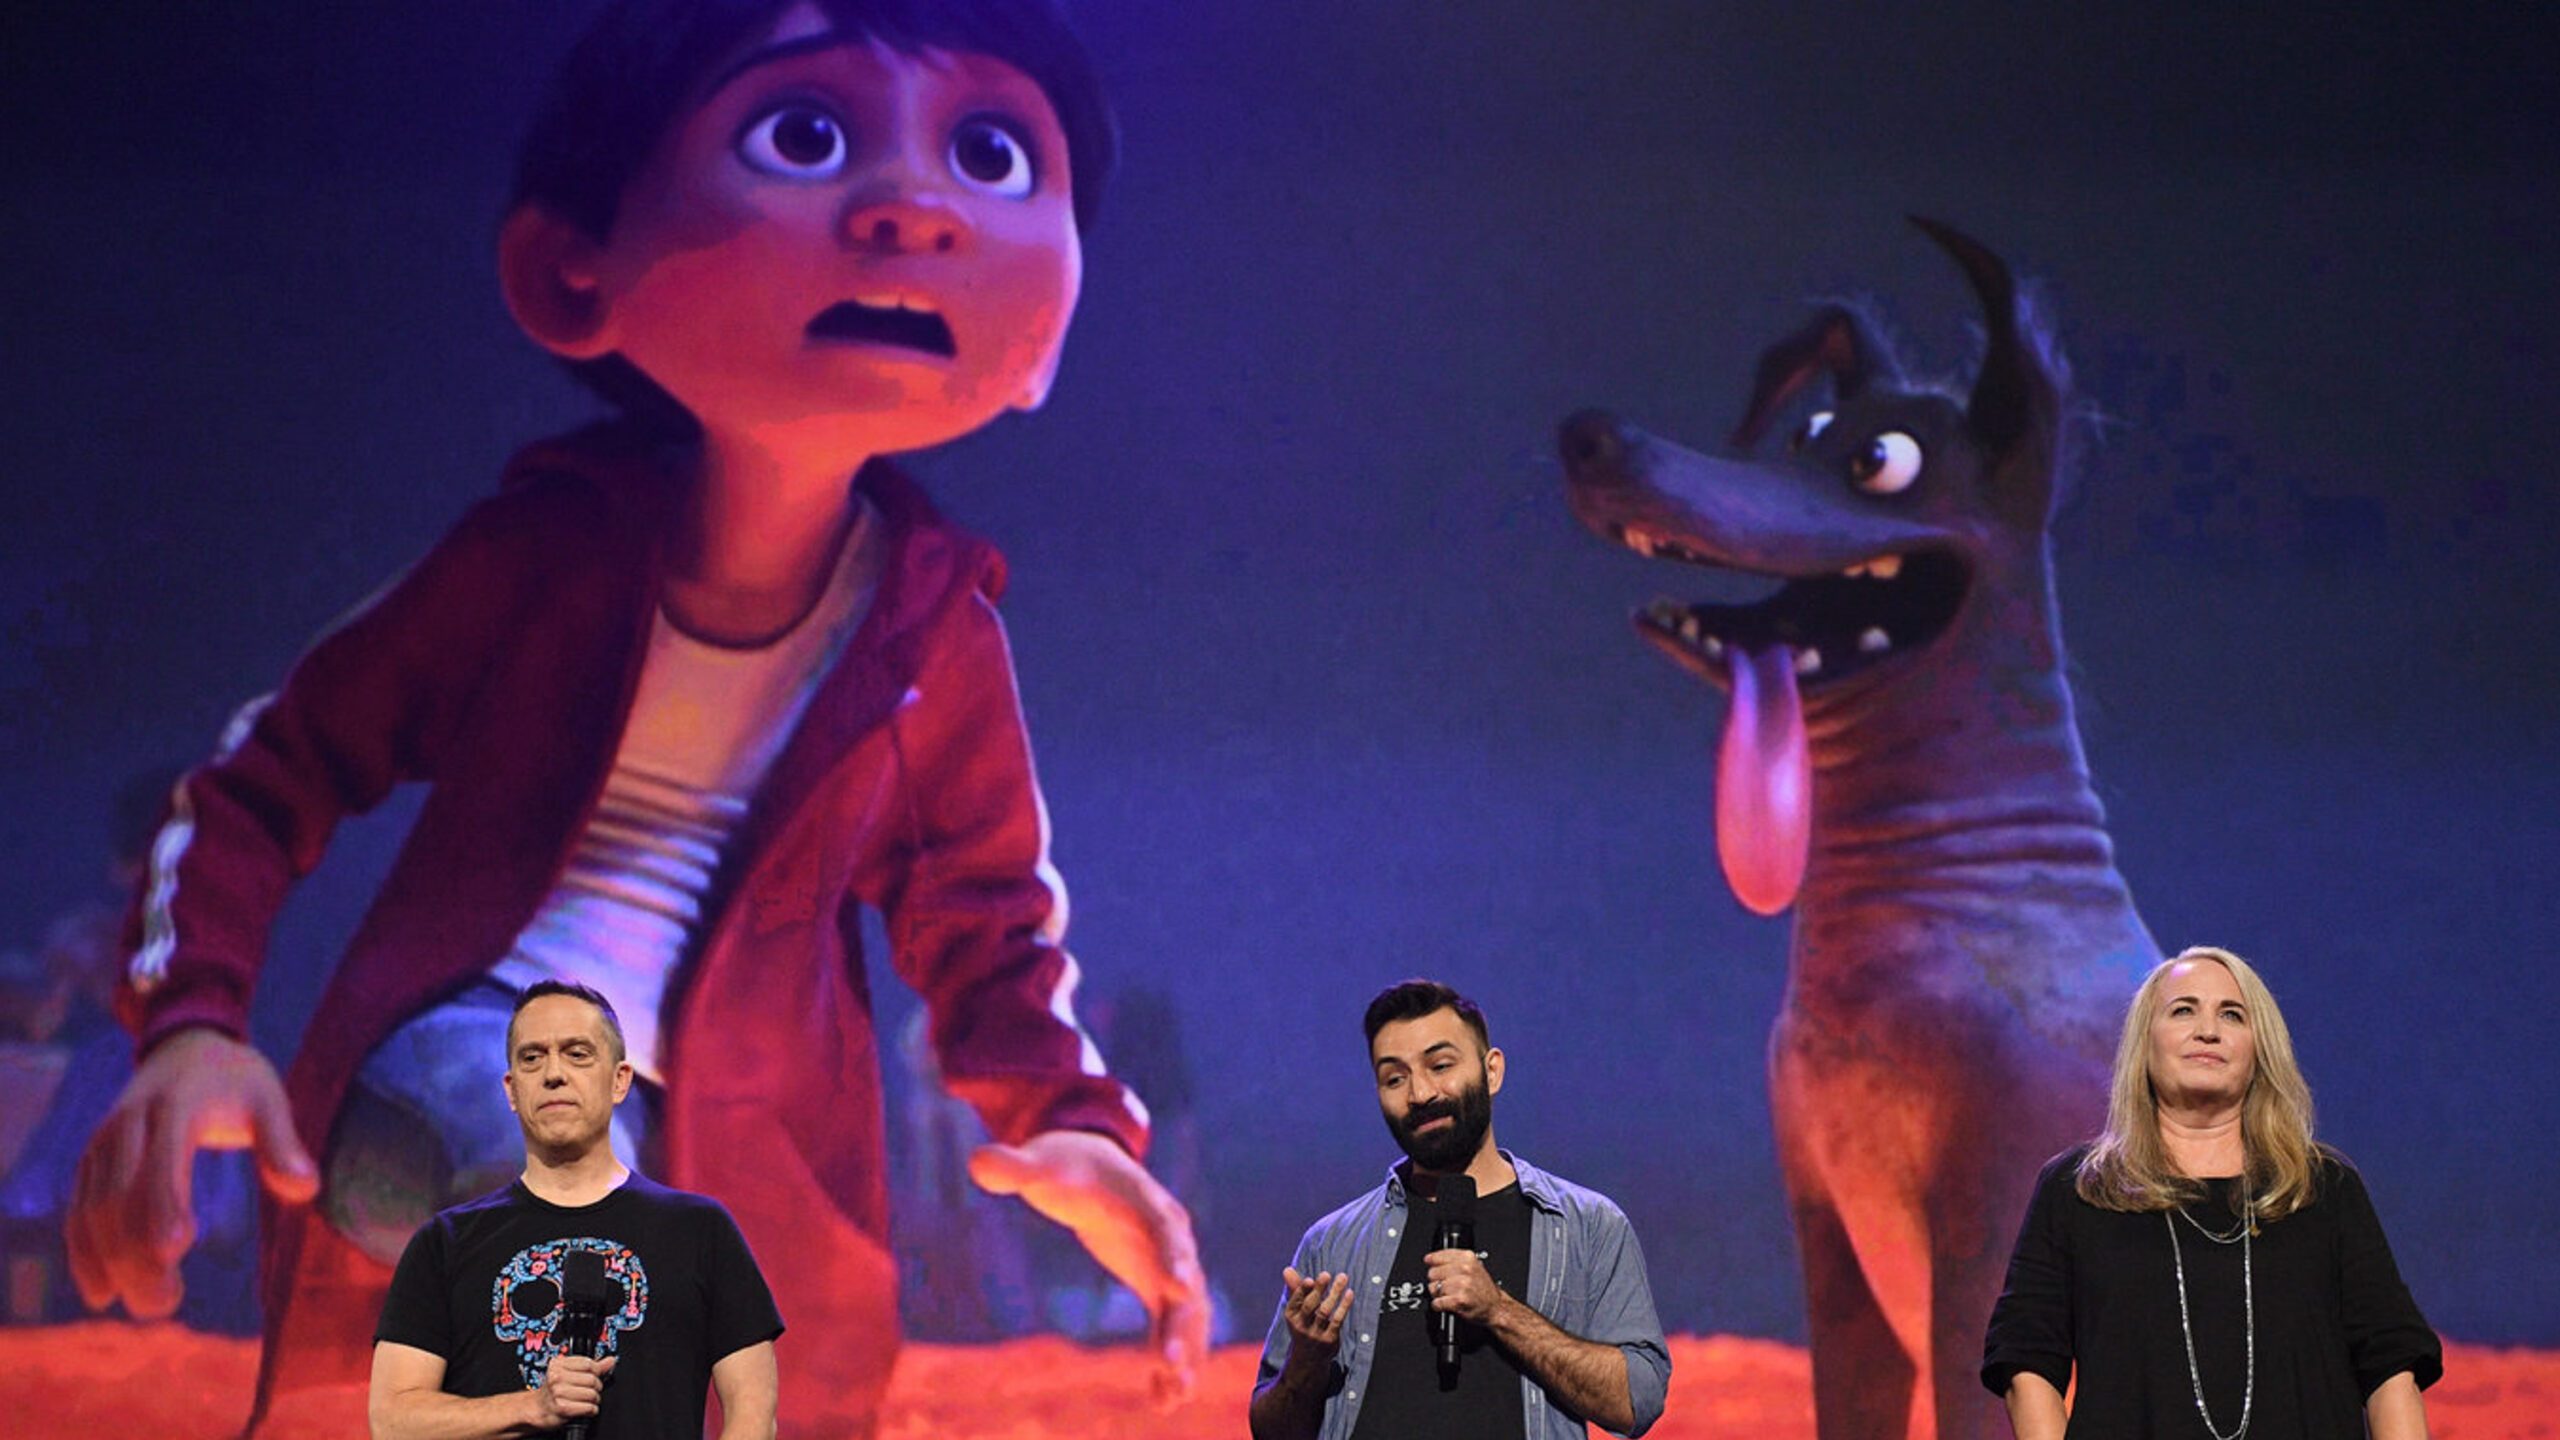 D23 Expo 2017: Updates on Disney-Pixar’s 8 upcoming animated films